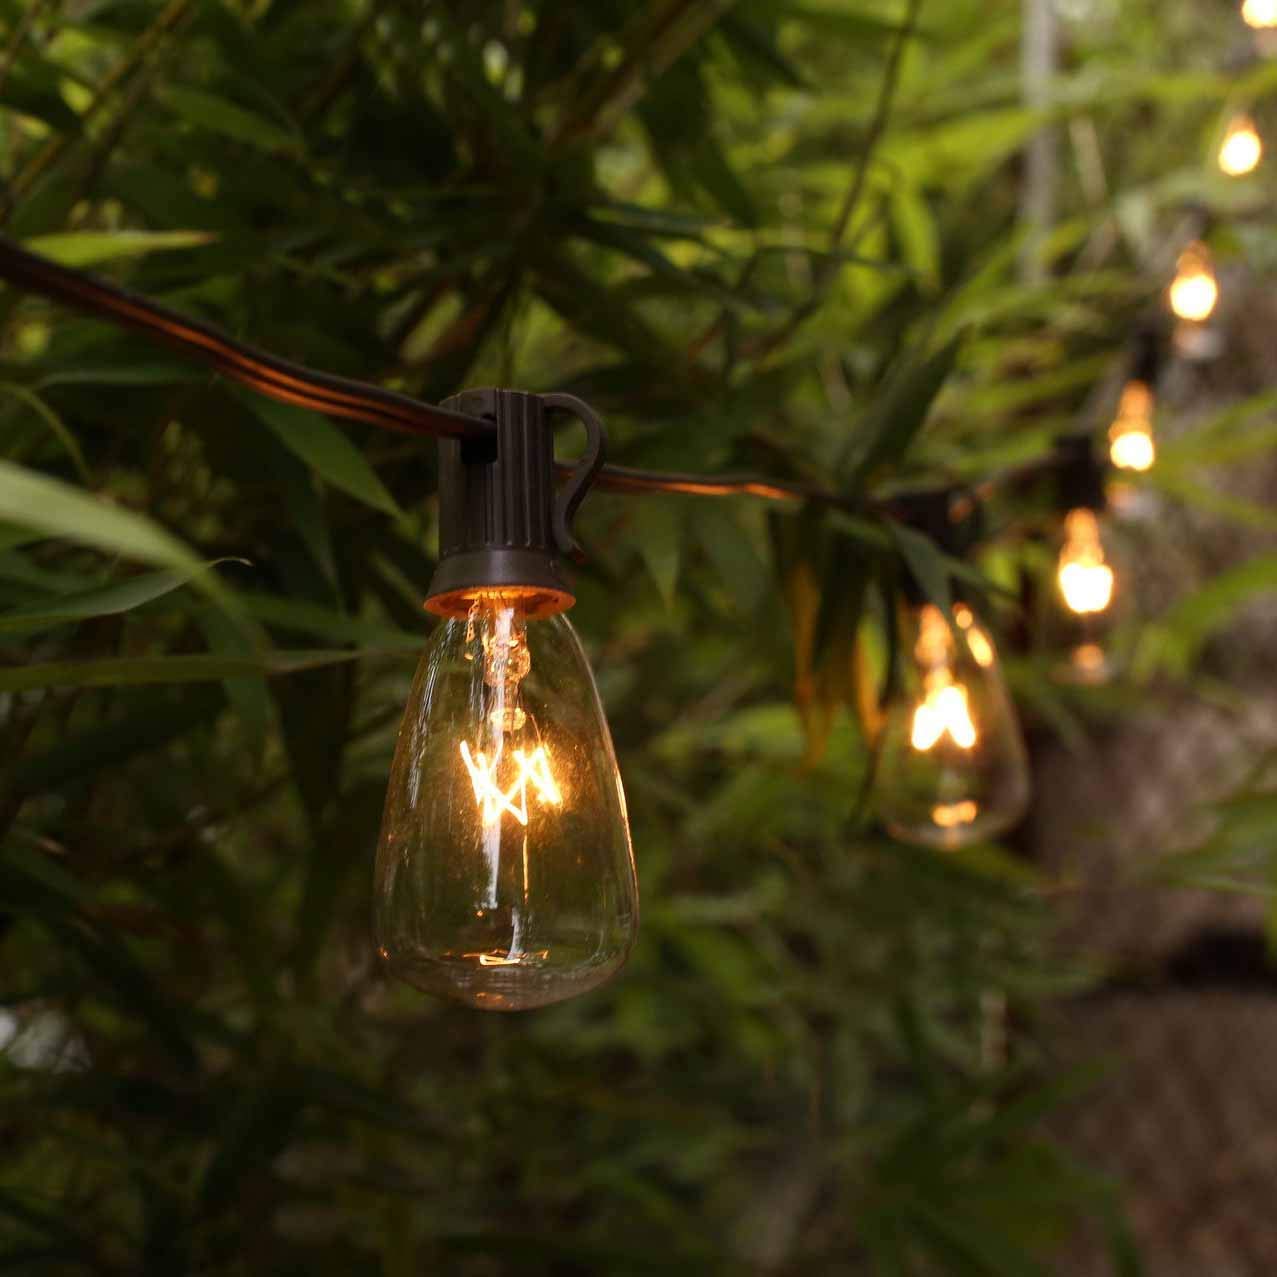 Patio String Lights Outdoor Edison Bulb Hanging Decor Featured Image